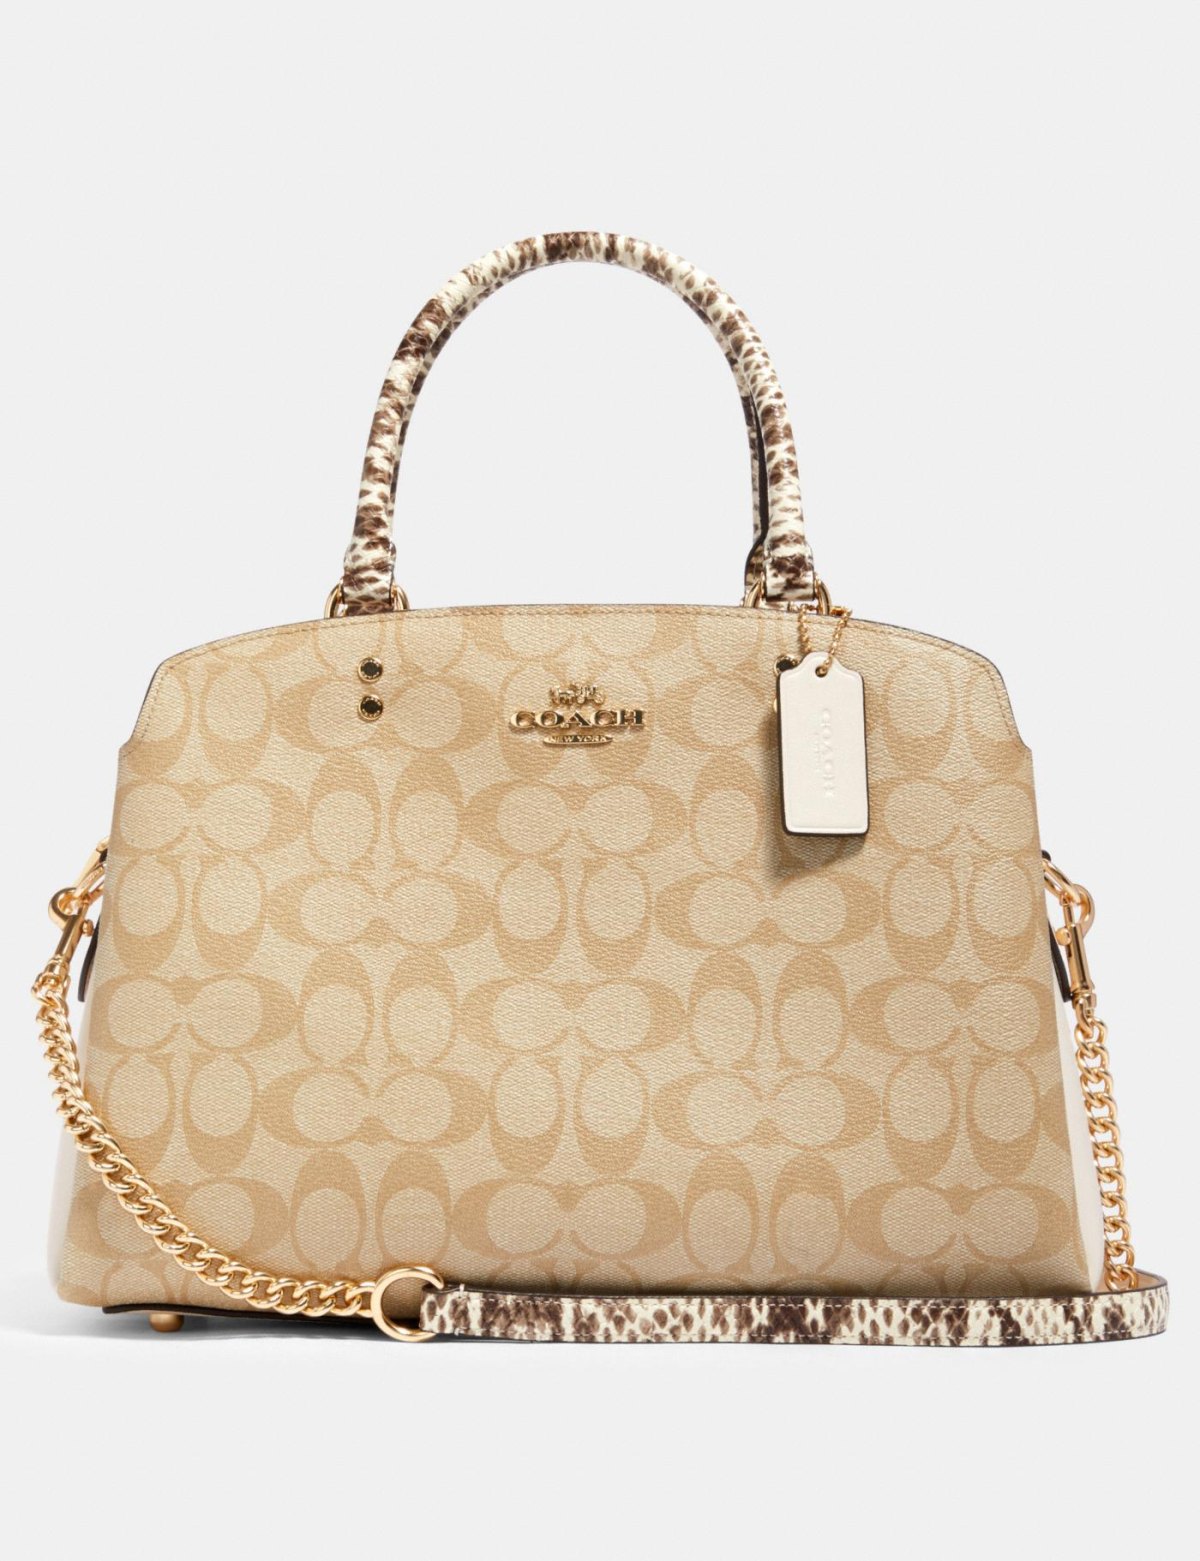 Coach Outlet deals: Save up to 70% on bestselling handbags, totes